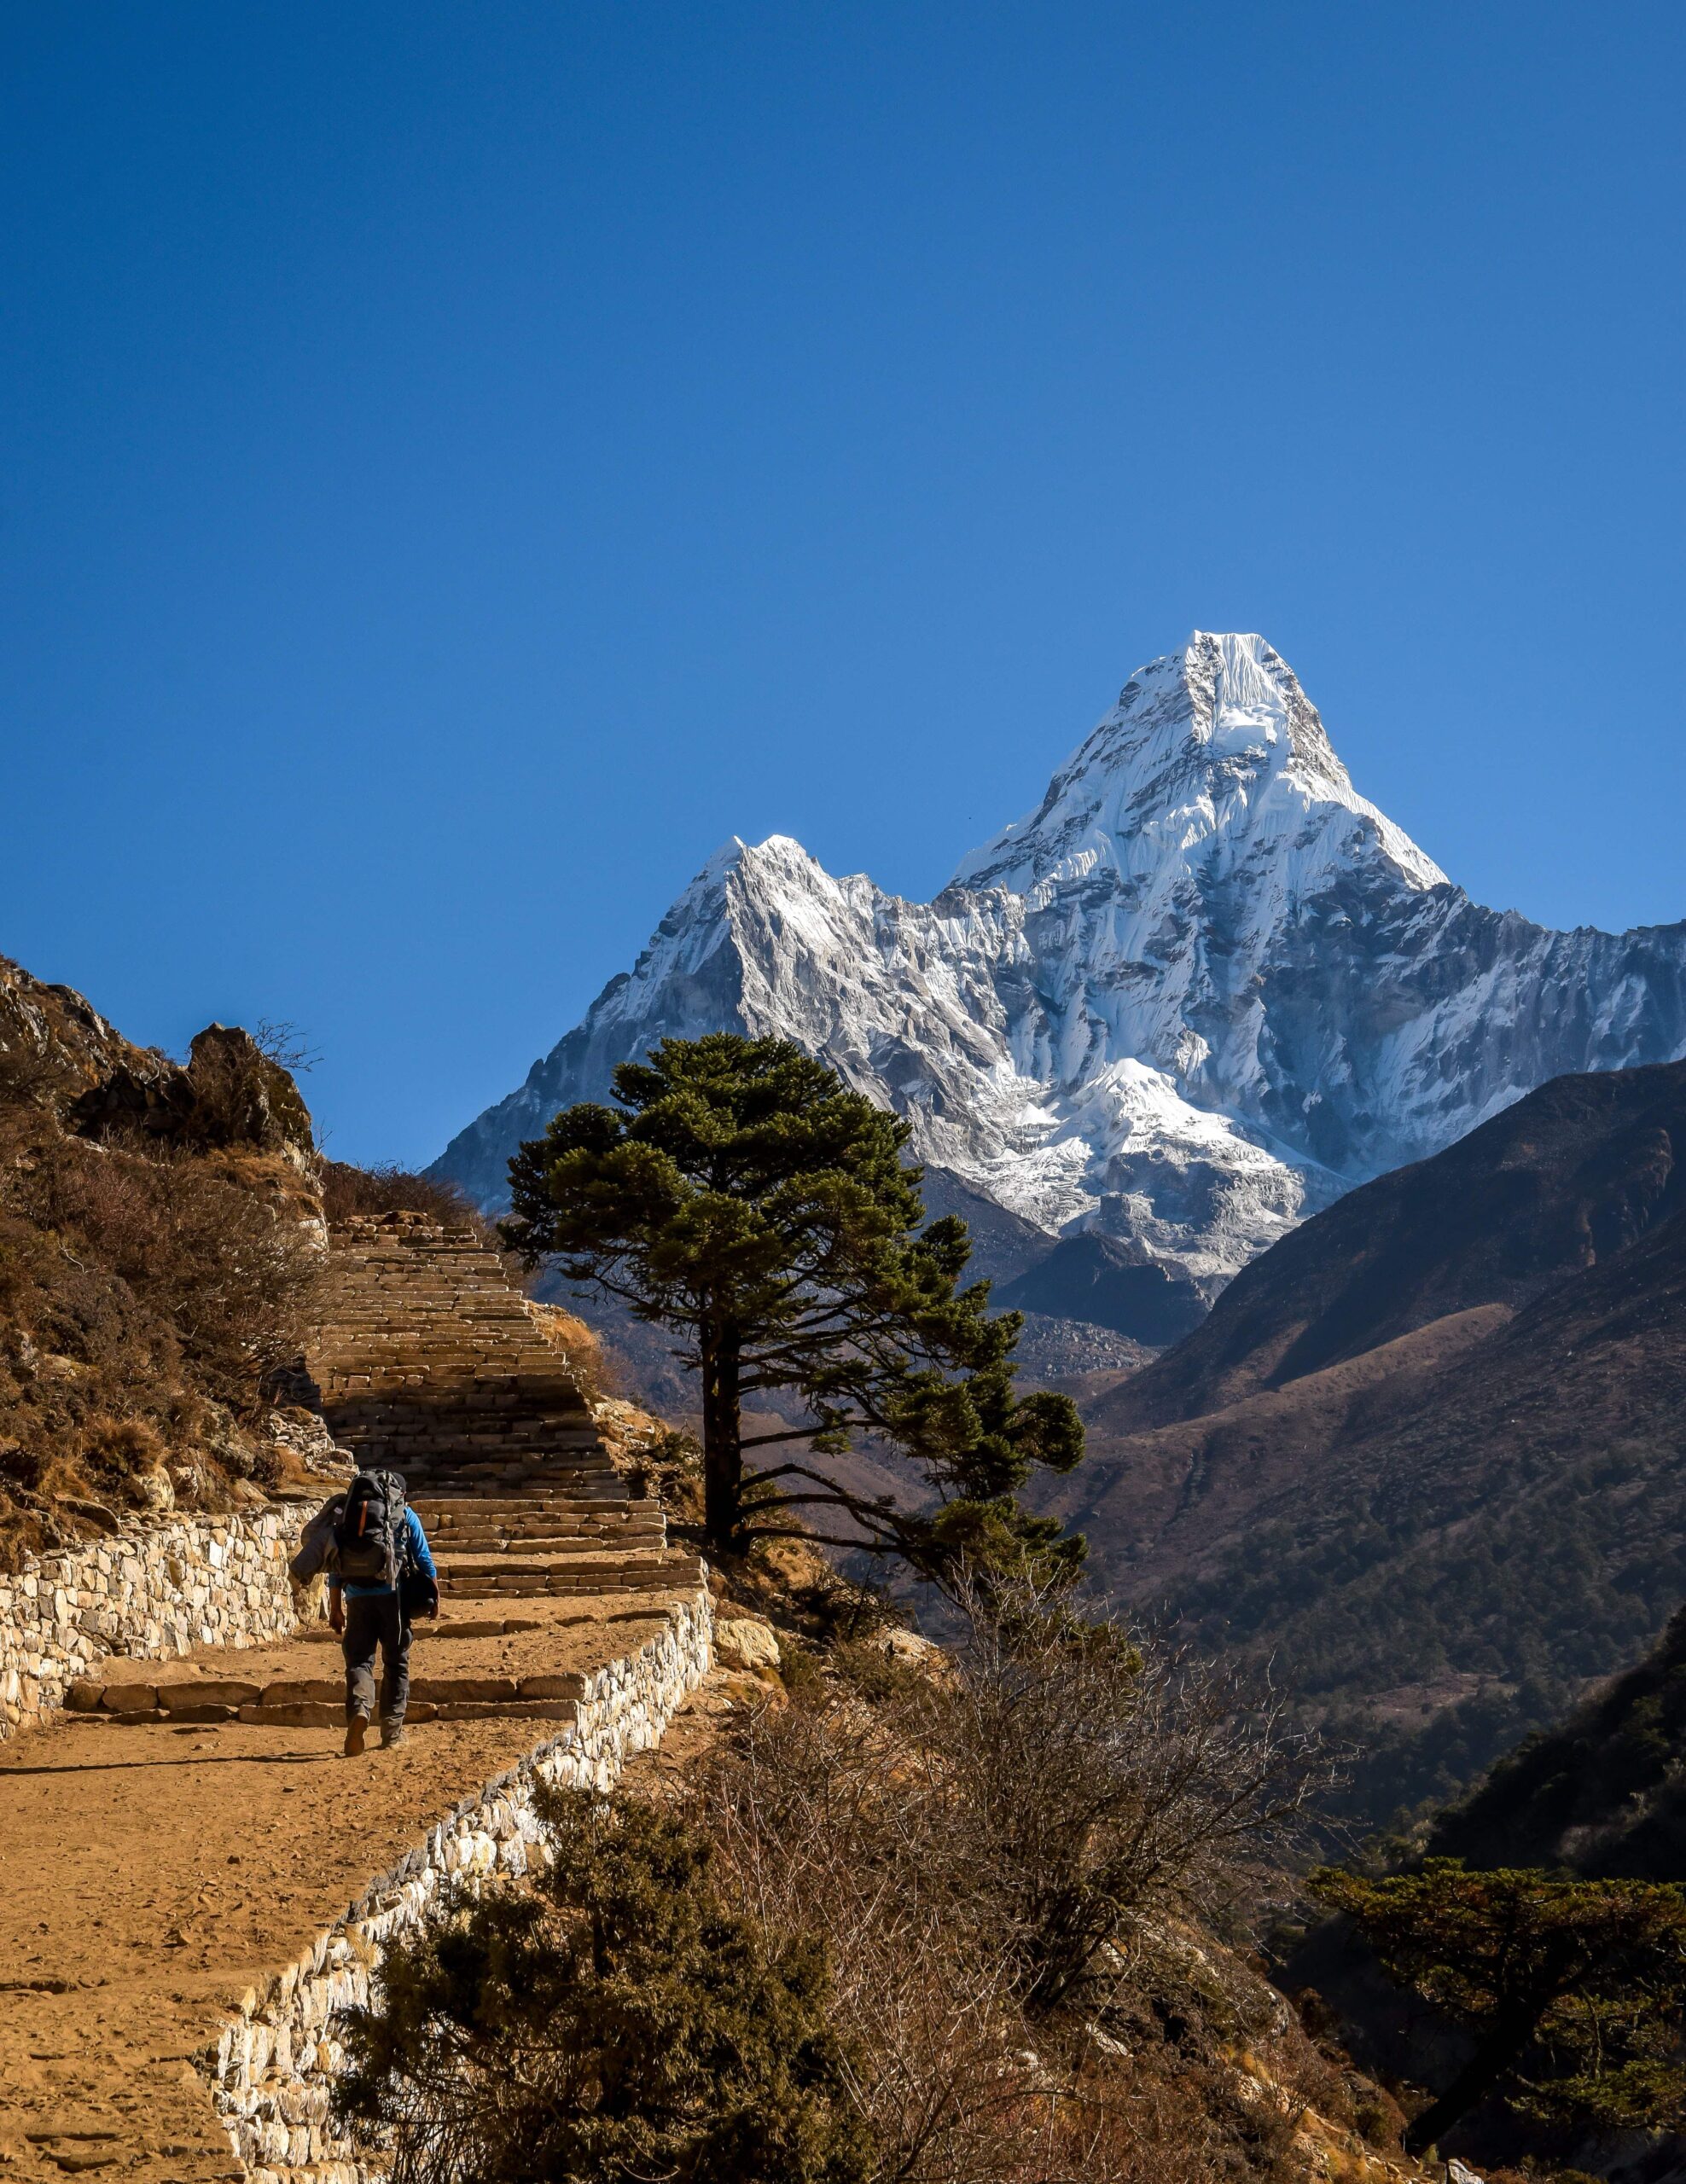 Nepal Luxury Tours excels at the Himalayan experience